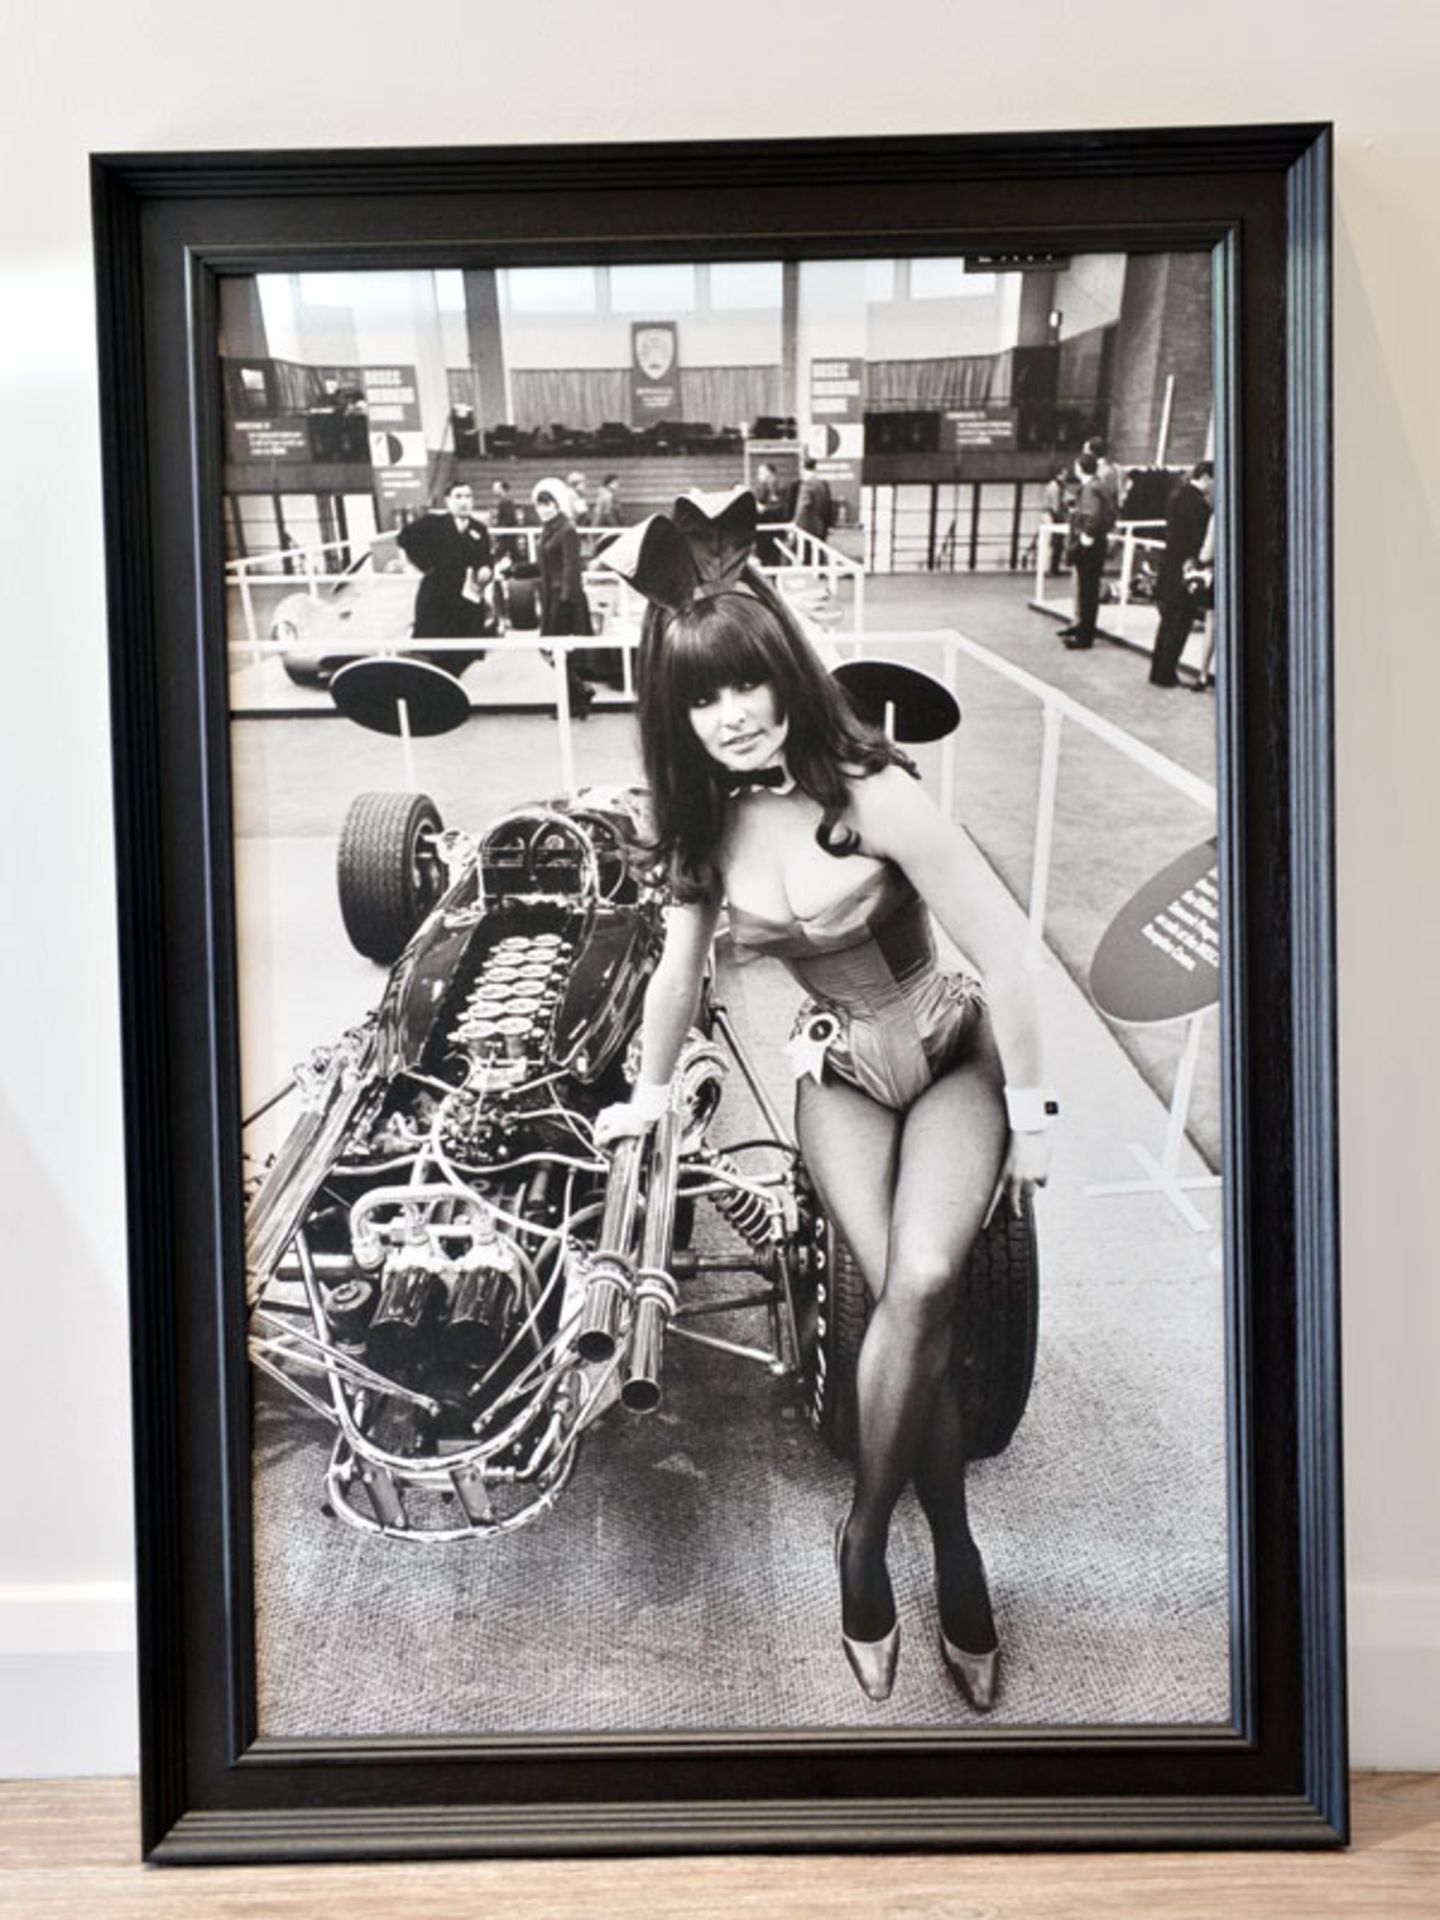 Bunny Girl at the '67 Motor Show'